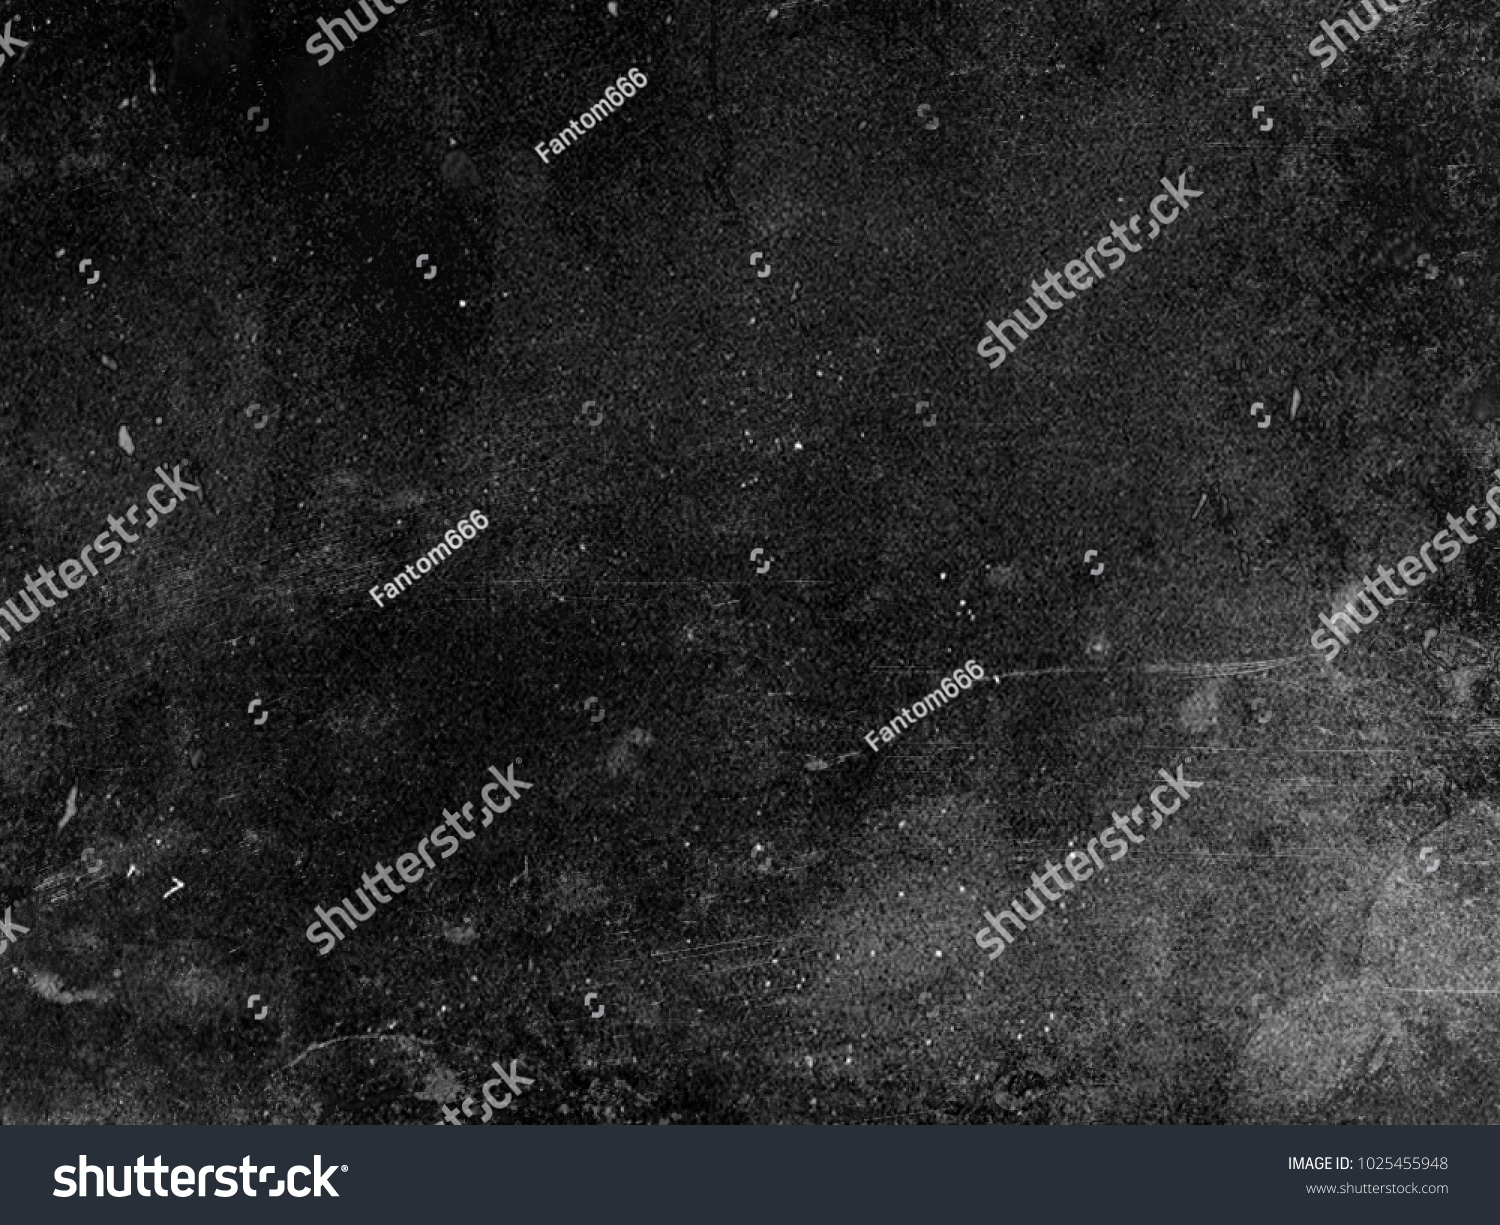 Dark scratched grunge background, old film effect, space for your text or picture #1025455948